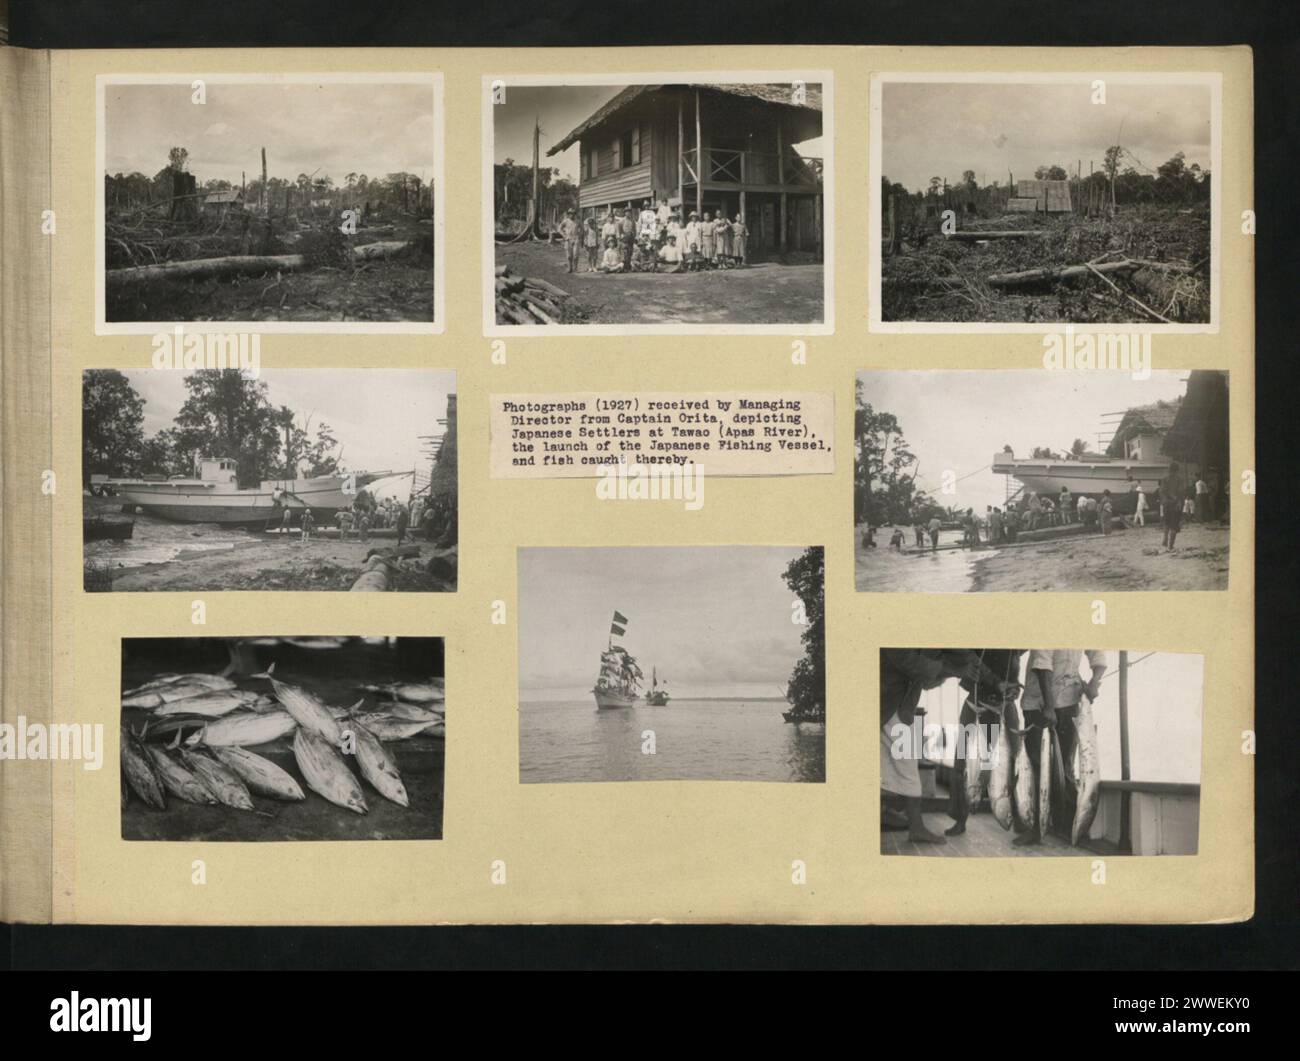 Description: Photographs (1927) received by Managing Director from Captain Orita, depicting Japanese Settlers at Tawao (Apas River), the launch of the Japanese Fishing Vessel, and fish caught thereby. Location: Tawao, Borneo Date: 1927 asia, malaysia, borneo, sabah, asiathroughalens Stock Photo